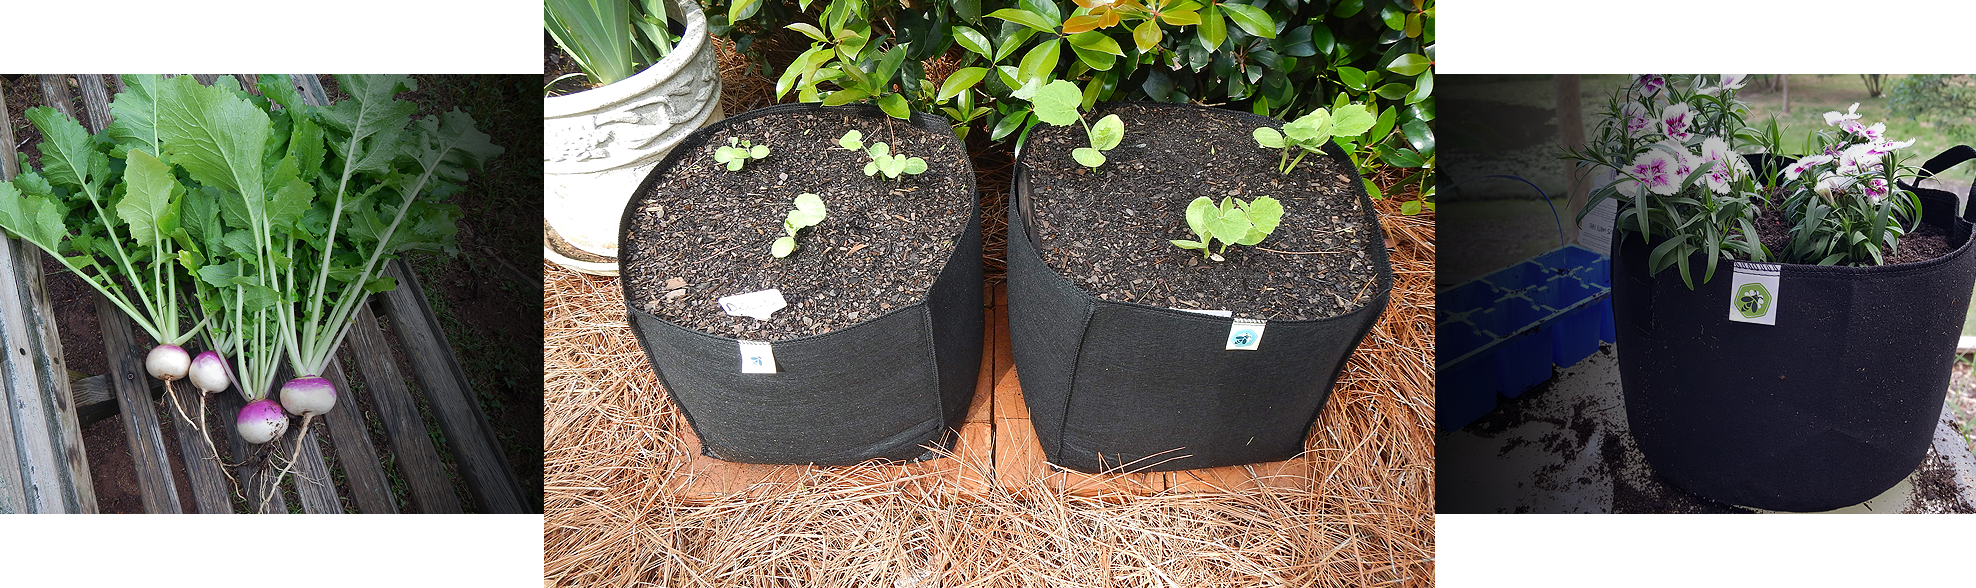 Grow bags for plants